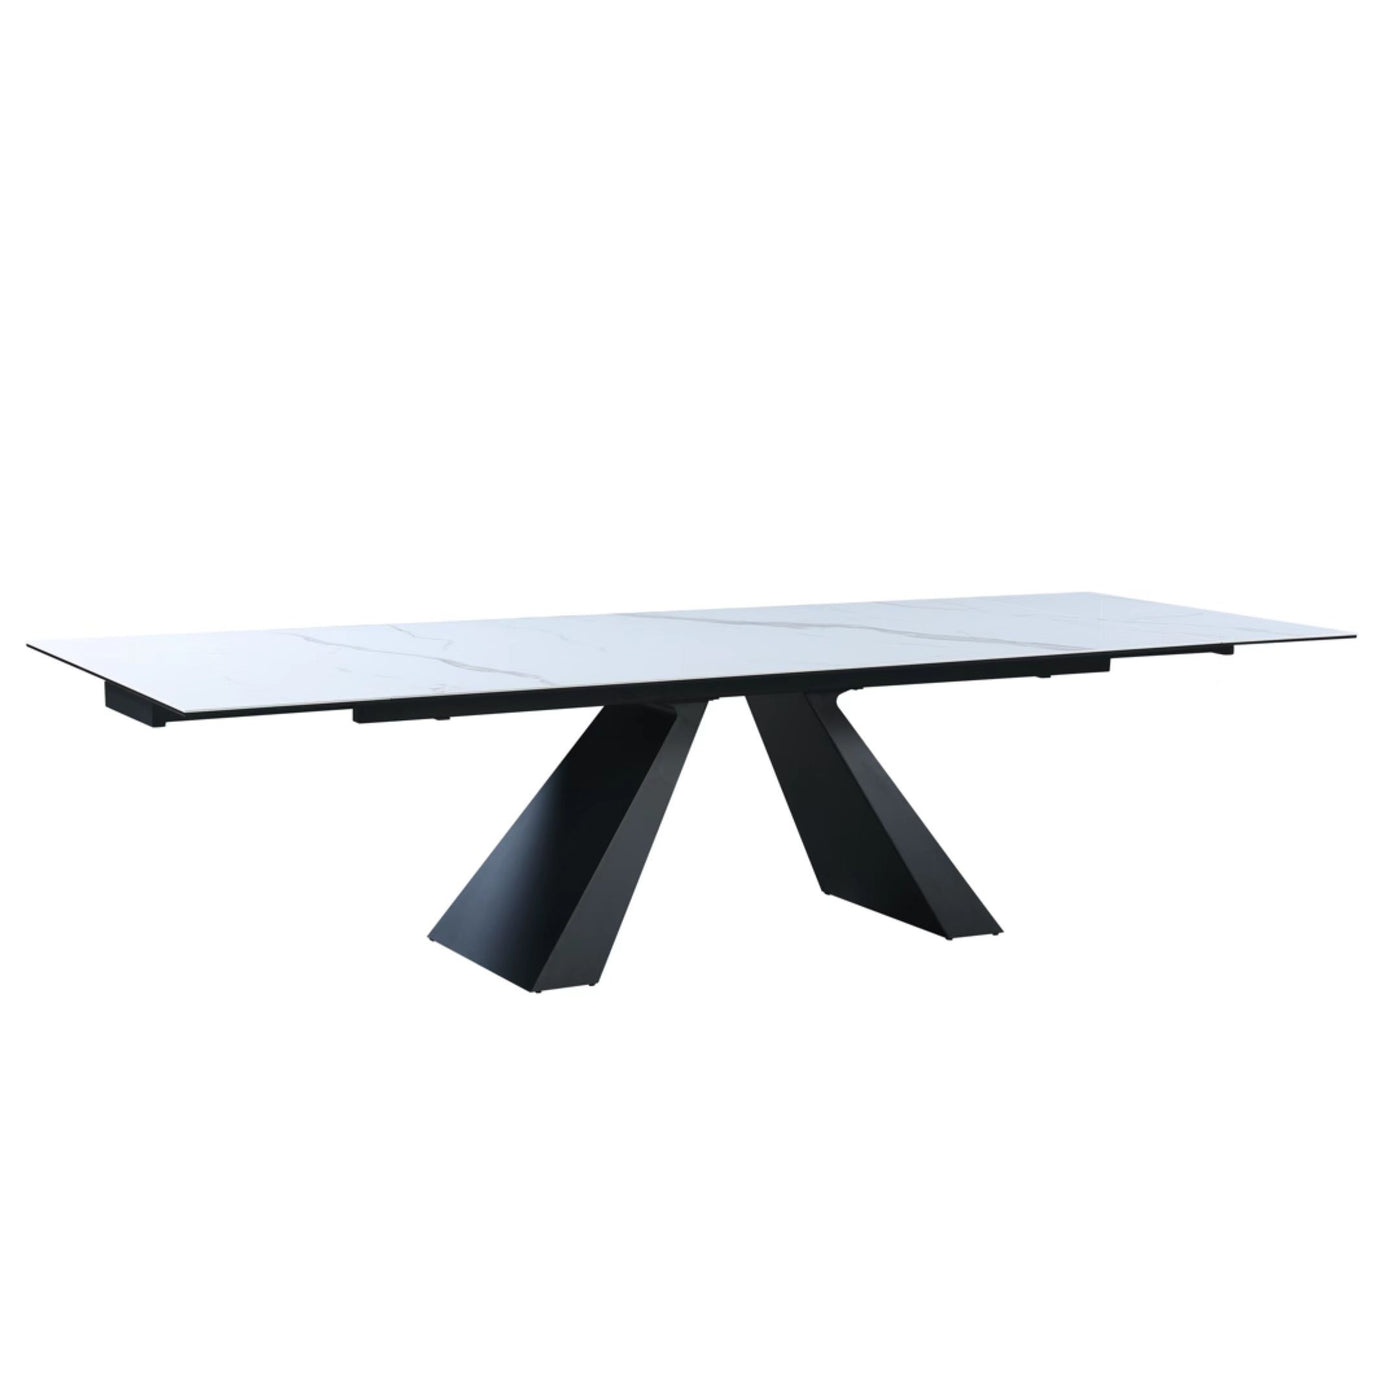 Hailey Ext. Dining Table